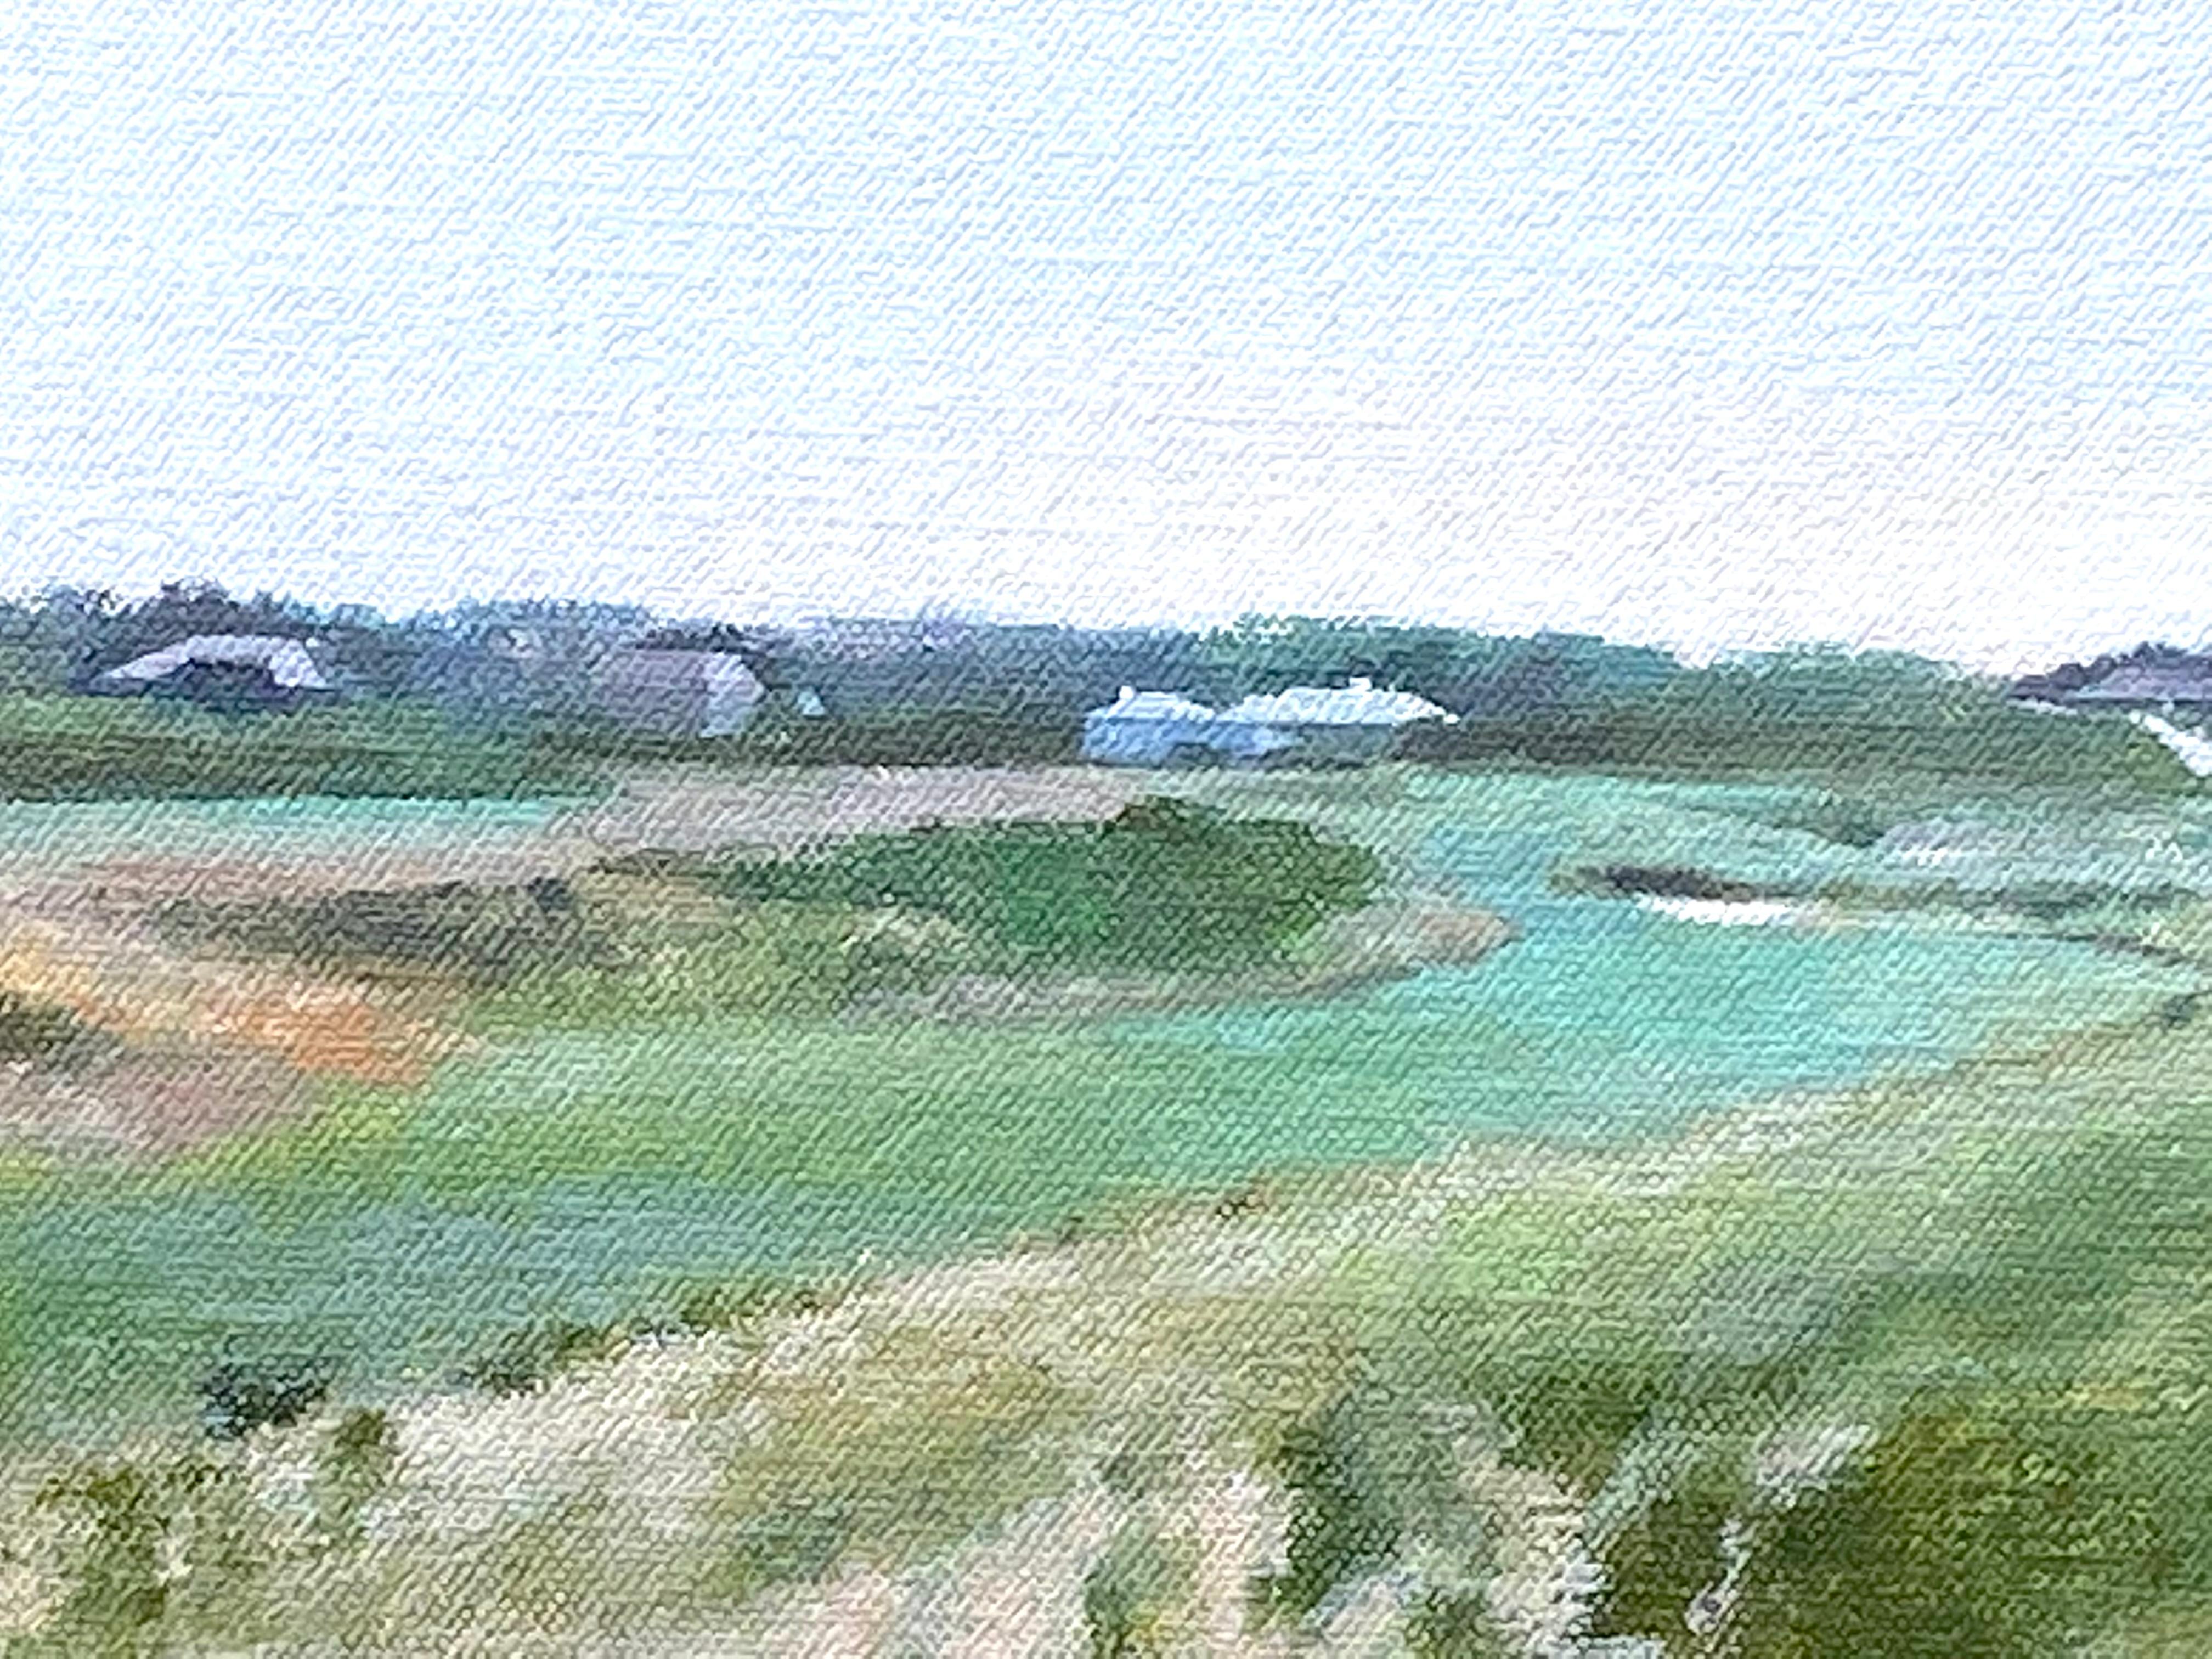 “Maidstone Club, East Hampton” - Gray Landscape Painting by Peter D. Schnore